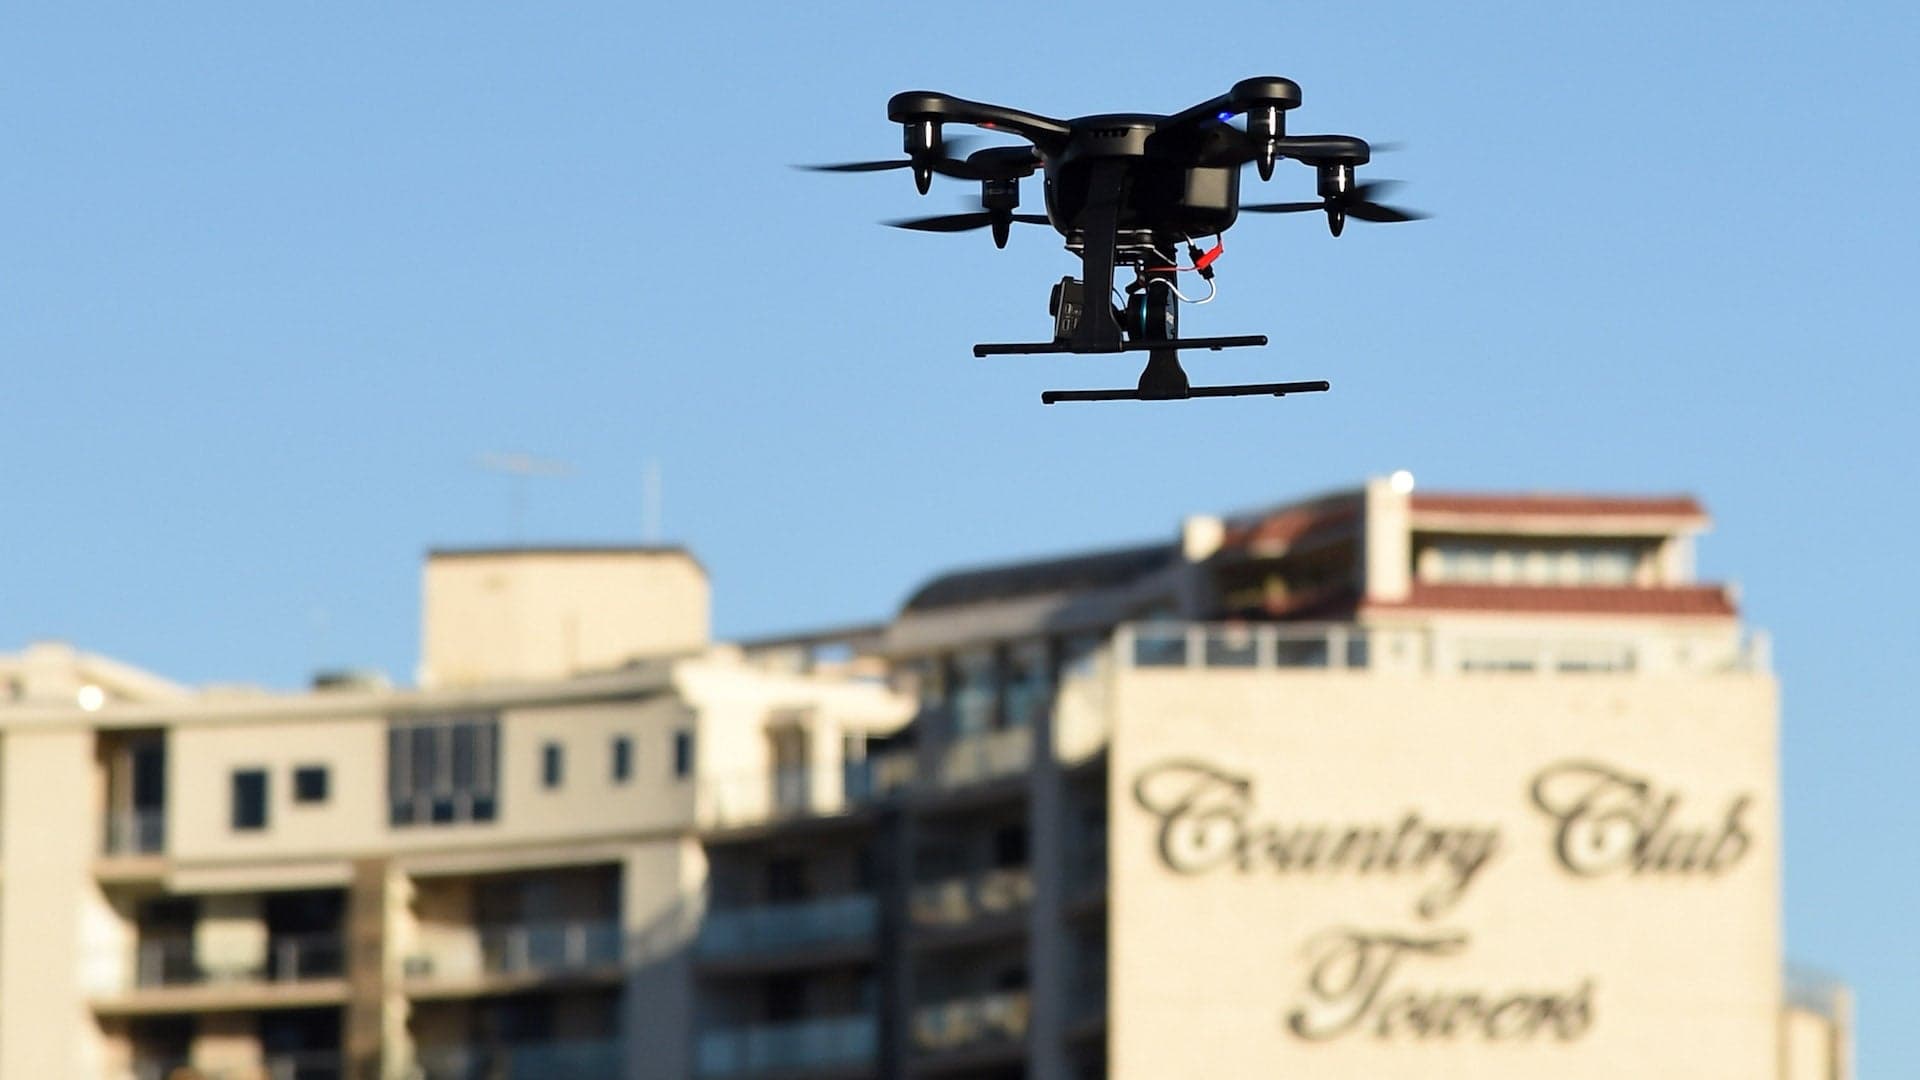 Nevada Launches Drone Safety Center to Educate and Protect Residents